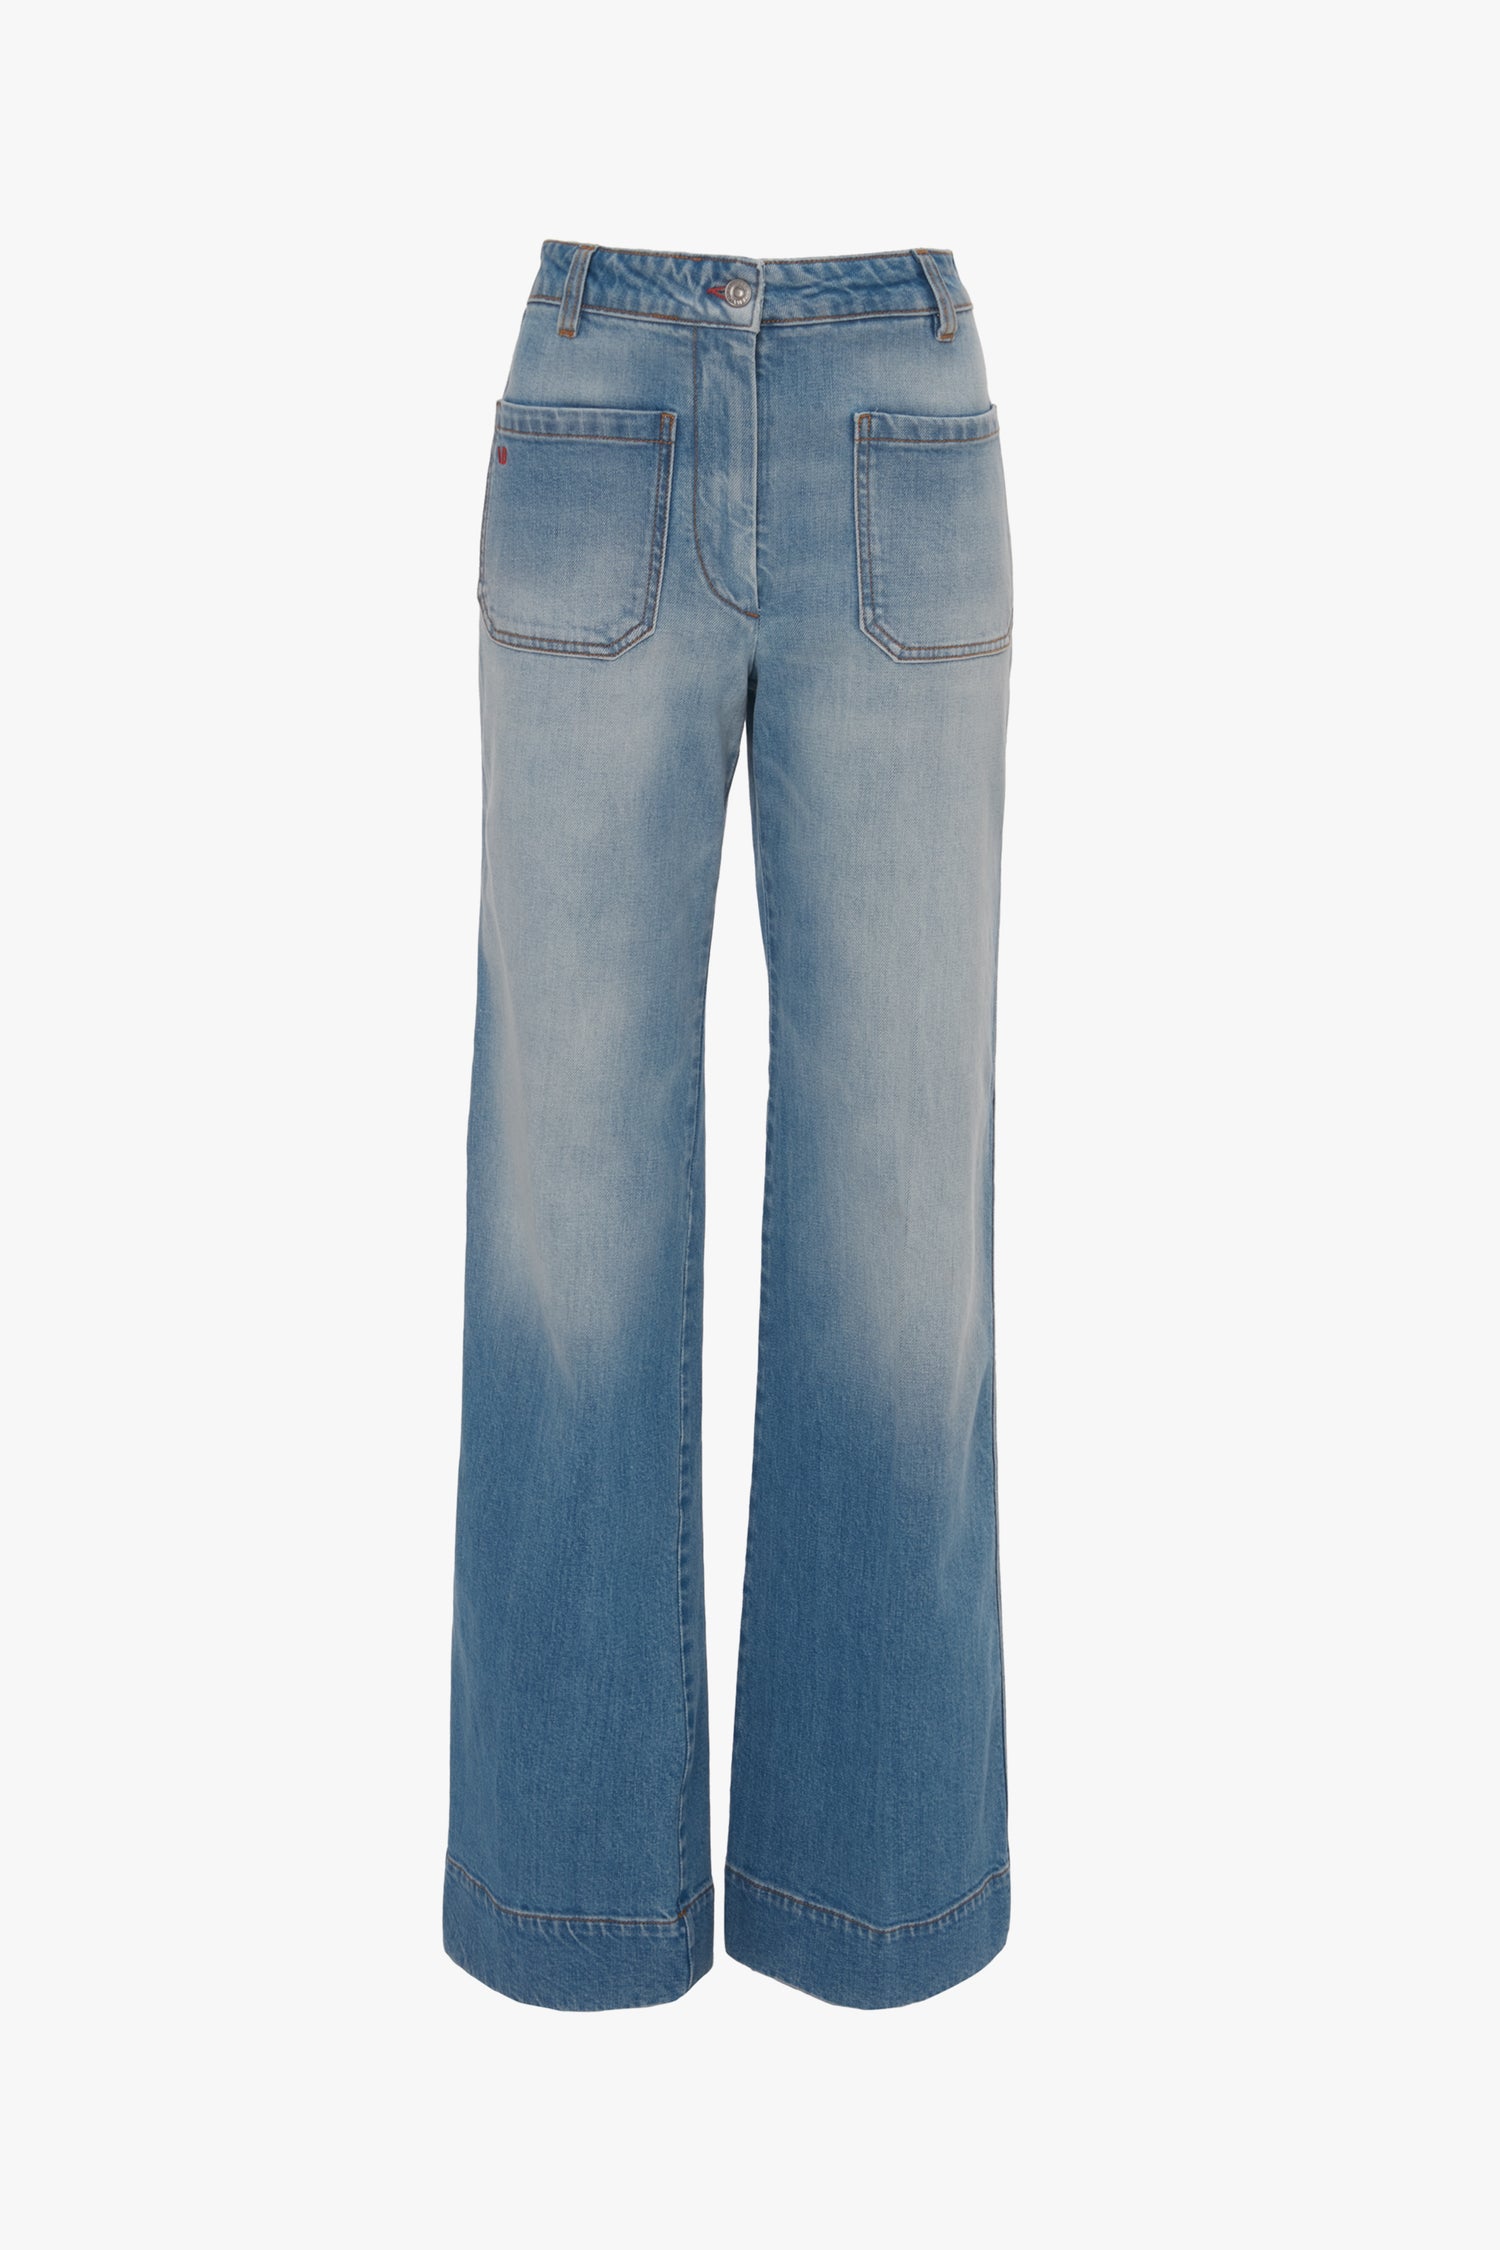 Wide-leg blue denim jeans with front pockets and a high waist. The Alina High Waisted Jean In Light Summer Wash by Victoria Beckham features vintage denim that is lightly faded for a slightly worn look.